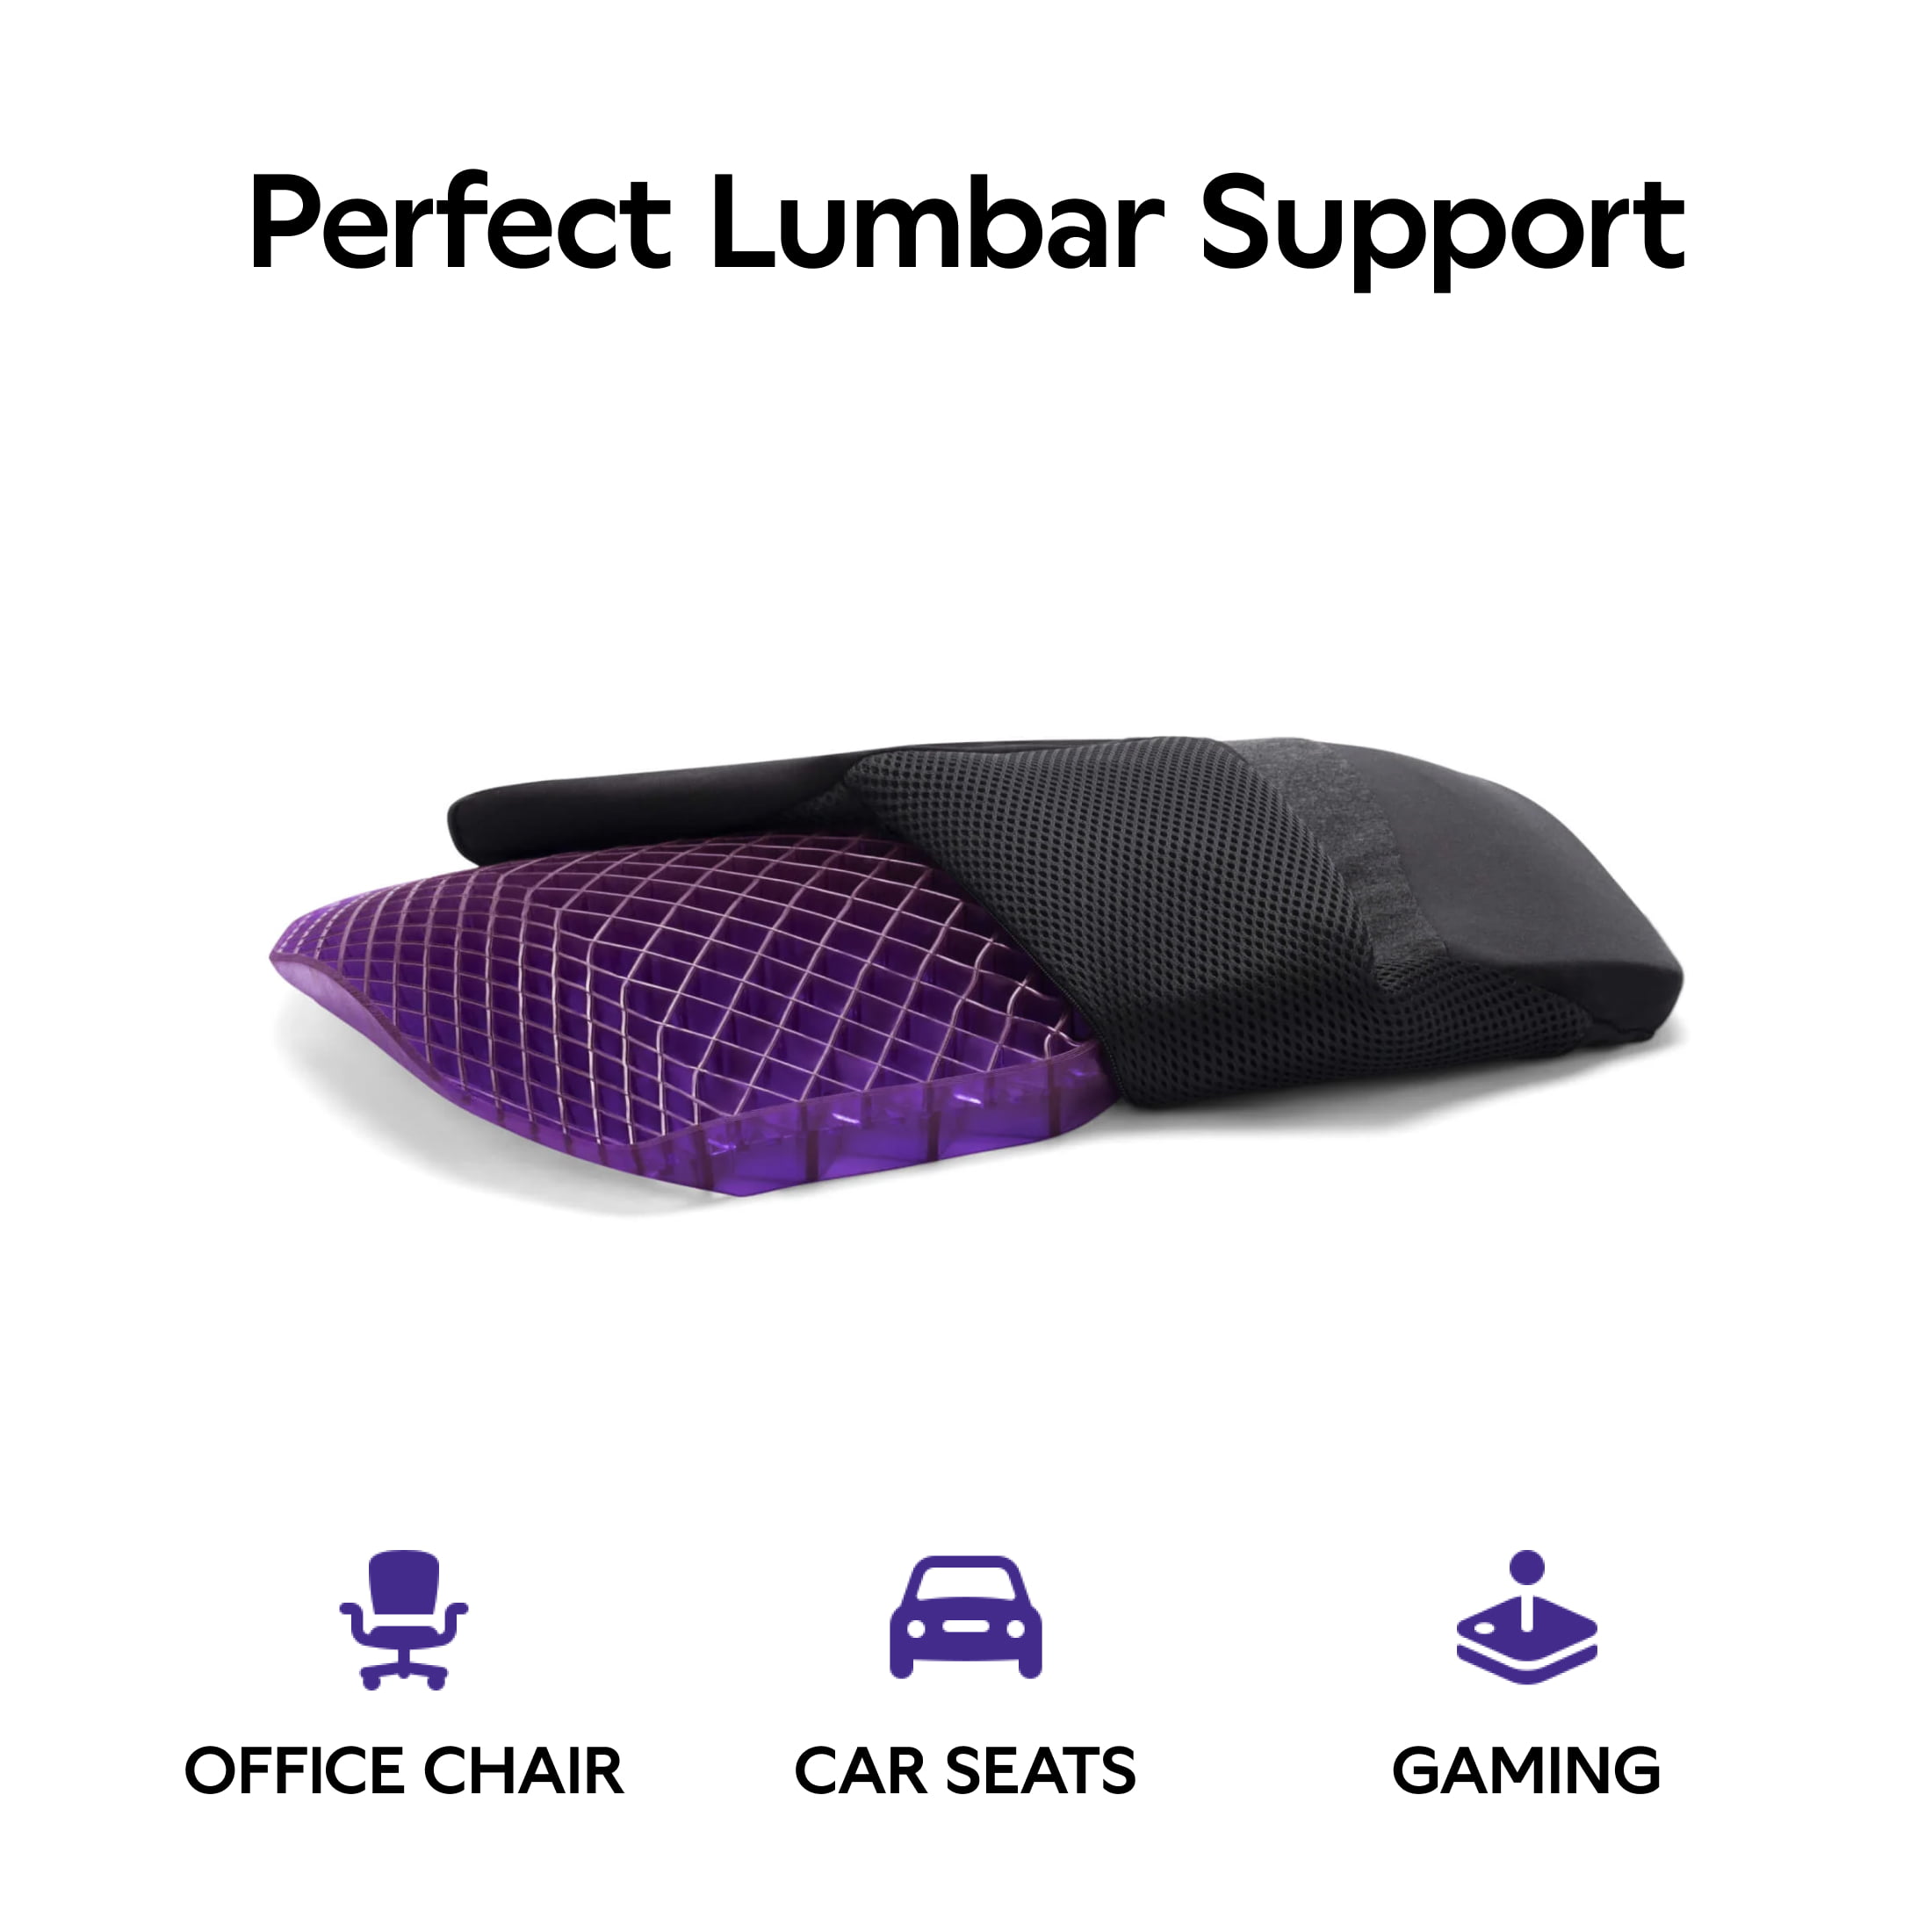 Purple Royal Seat Cushion for The Car Or Office Chair Temperature